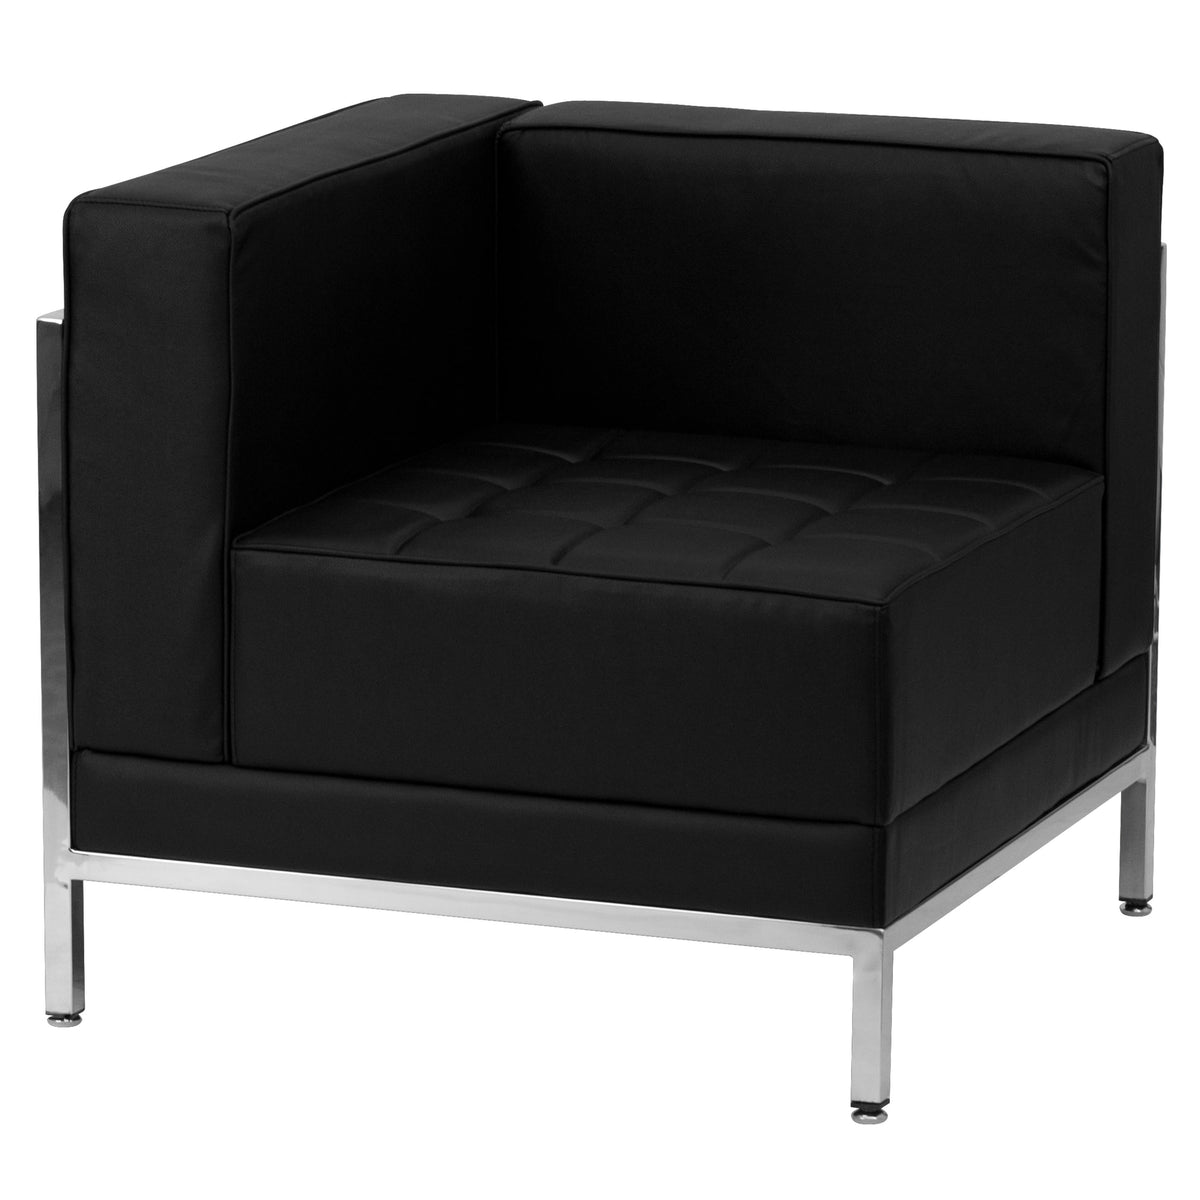 Black |#| 5 Piece Black LeatherSoft Modular Sofa Set with Taut Back and Seat